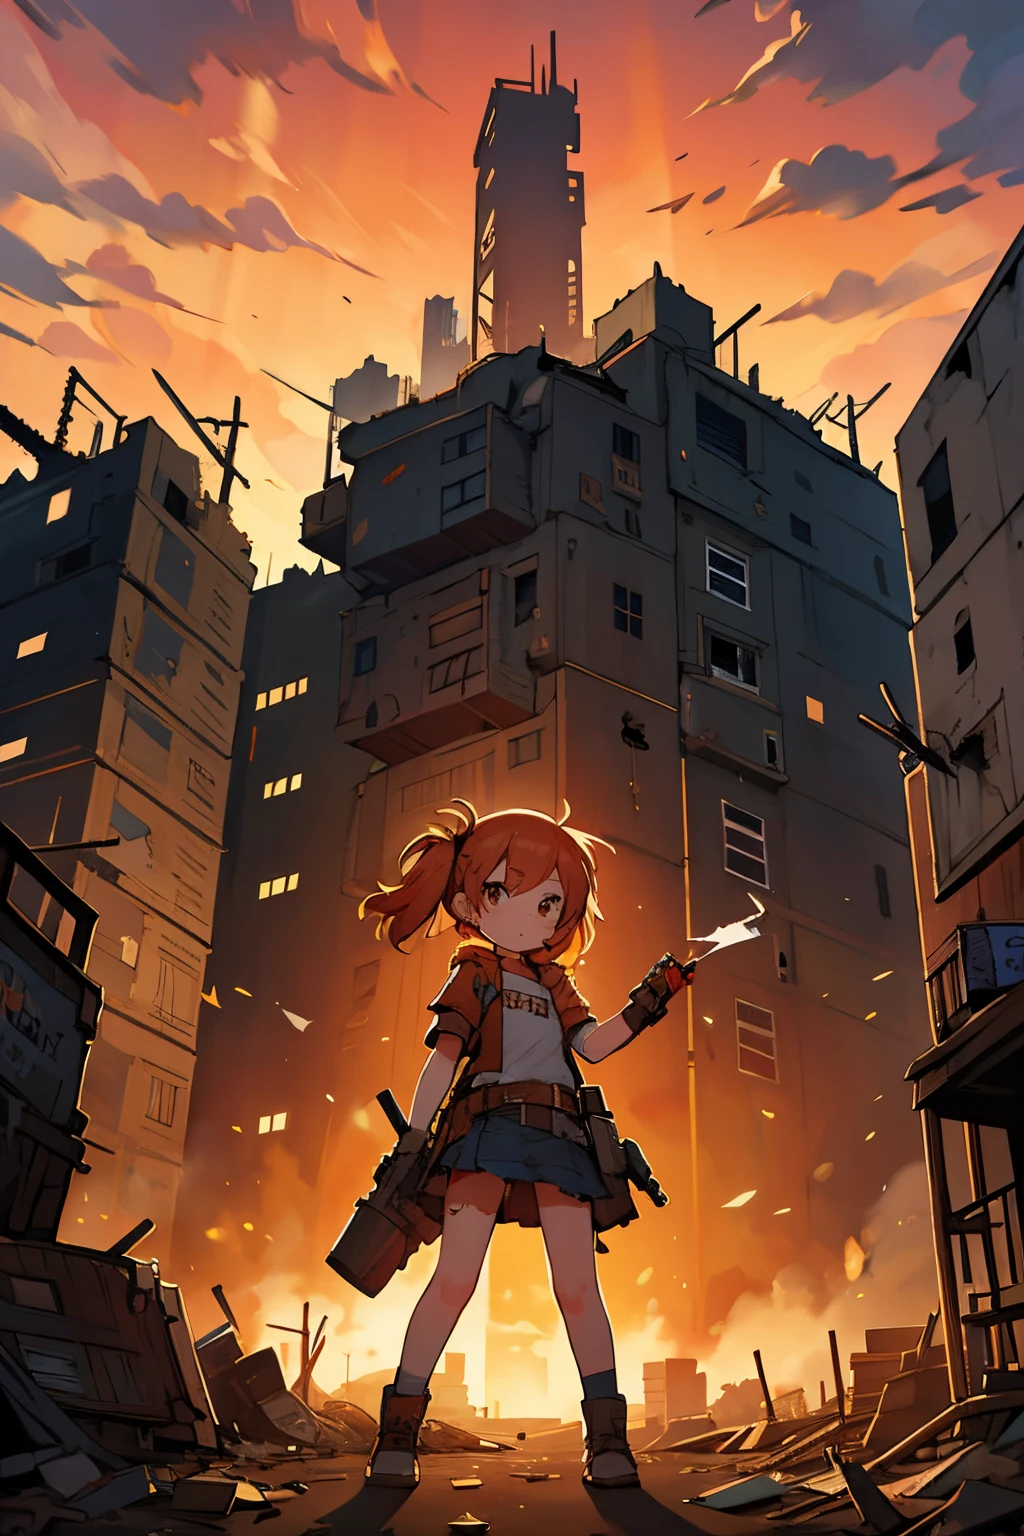  playing in a scrap heap, post-apocalyptic, scrap-punk, destroyed buildings, smoke, orange sky